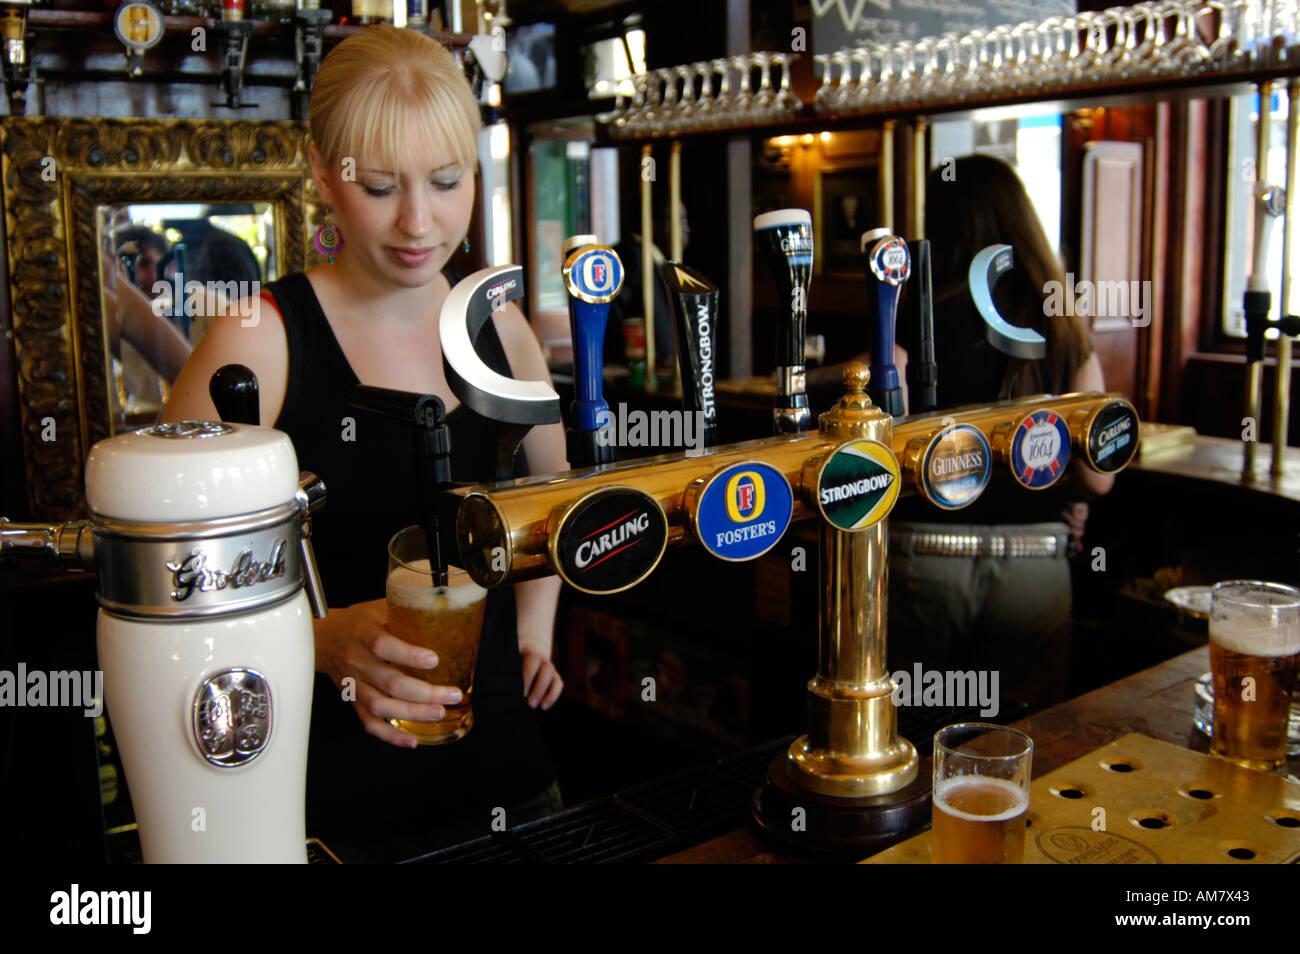 Pub barmaid pouring pint of lager in pub, Camden Town, London England UK Stock Photo